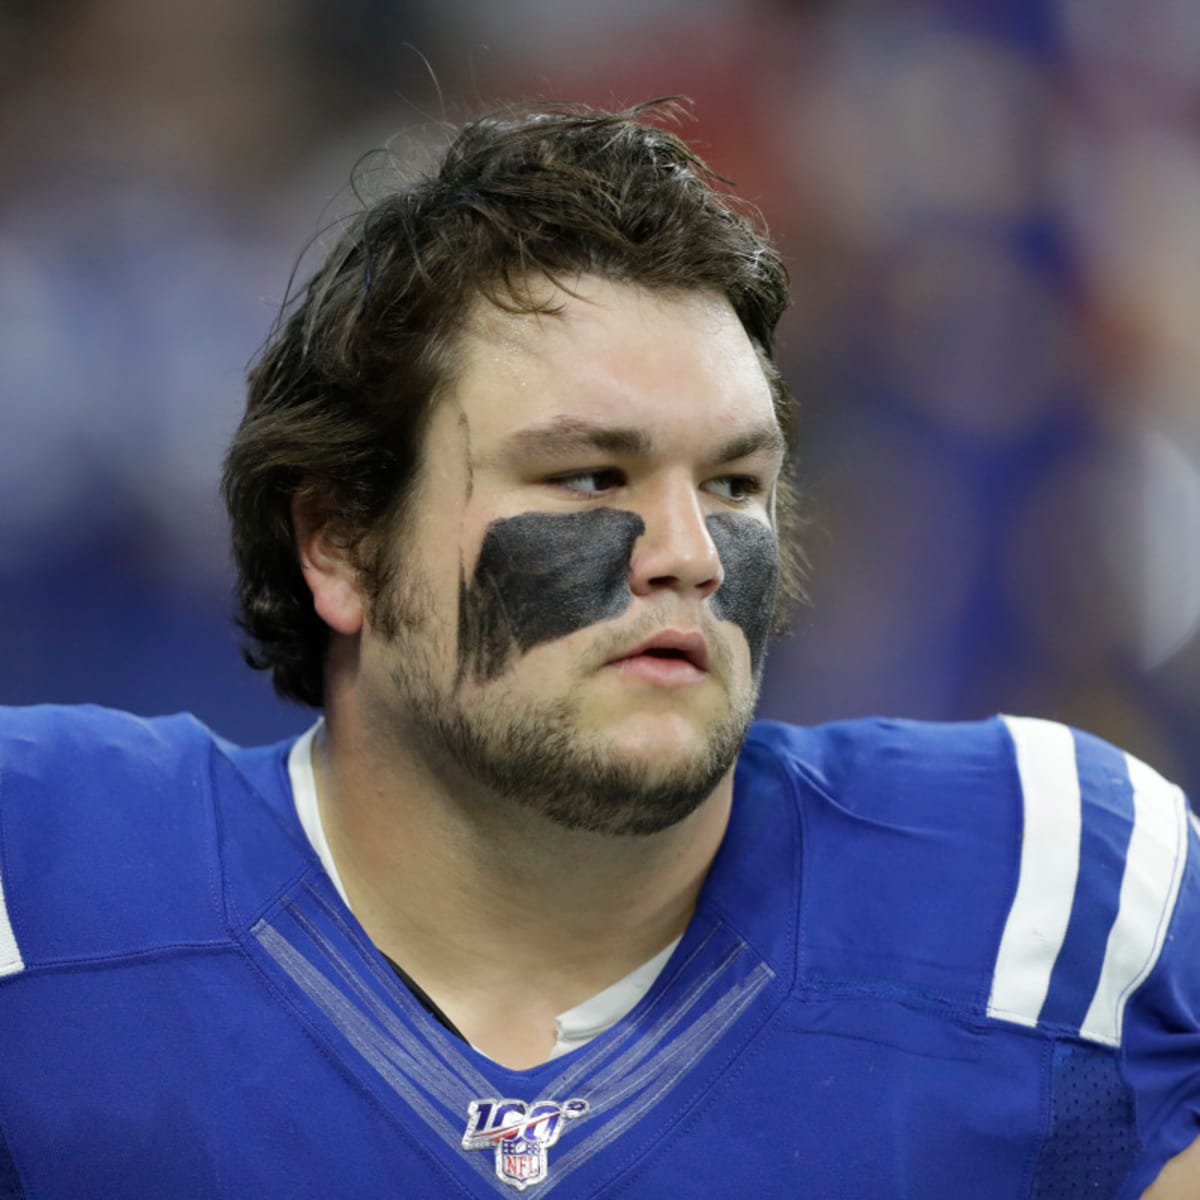 Menacing Colts guard Quenton Nelson wanted words with Bucs punter